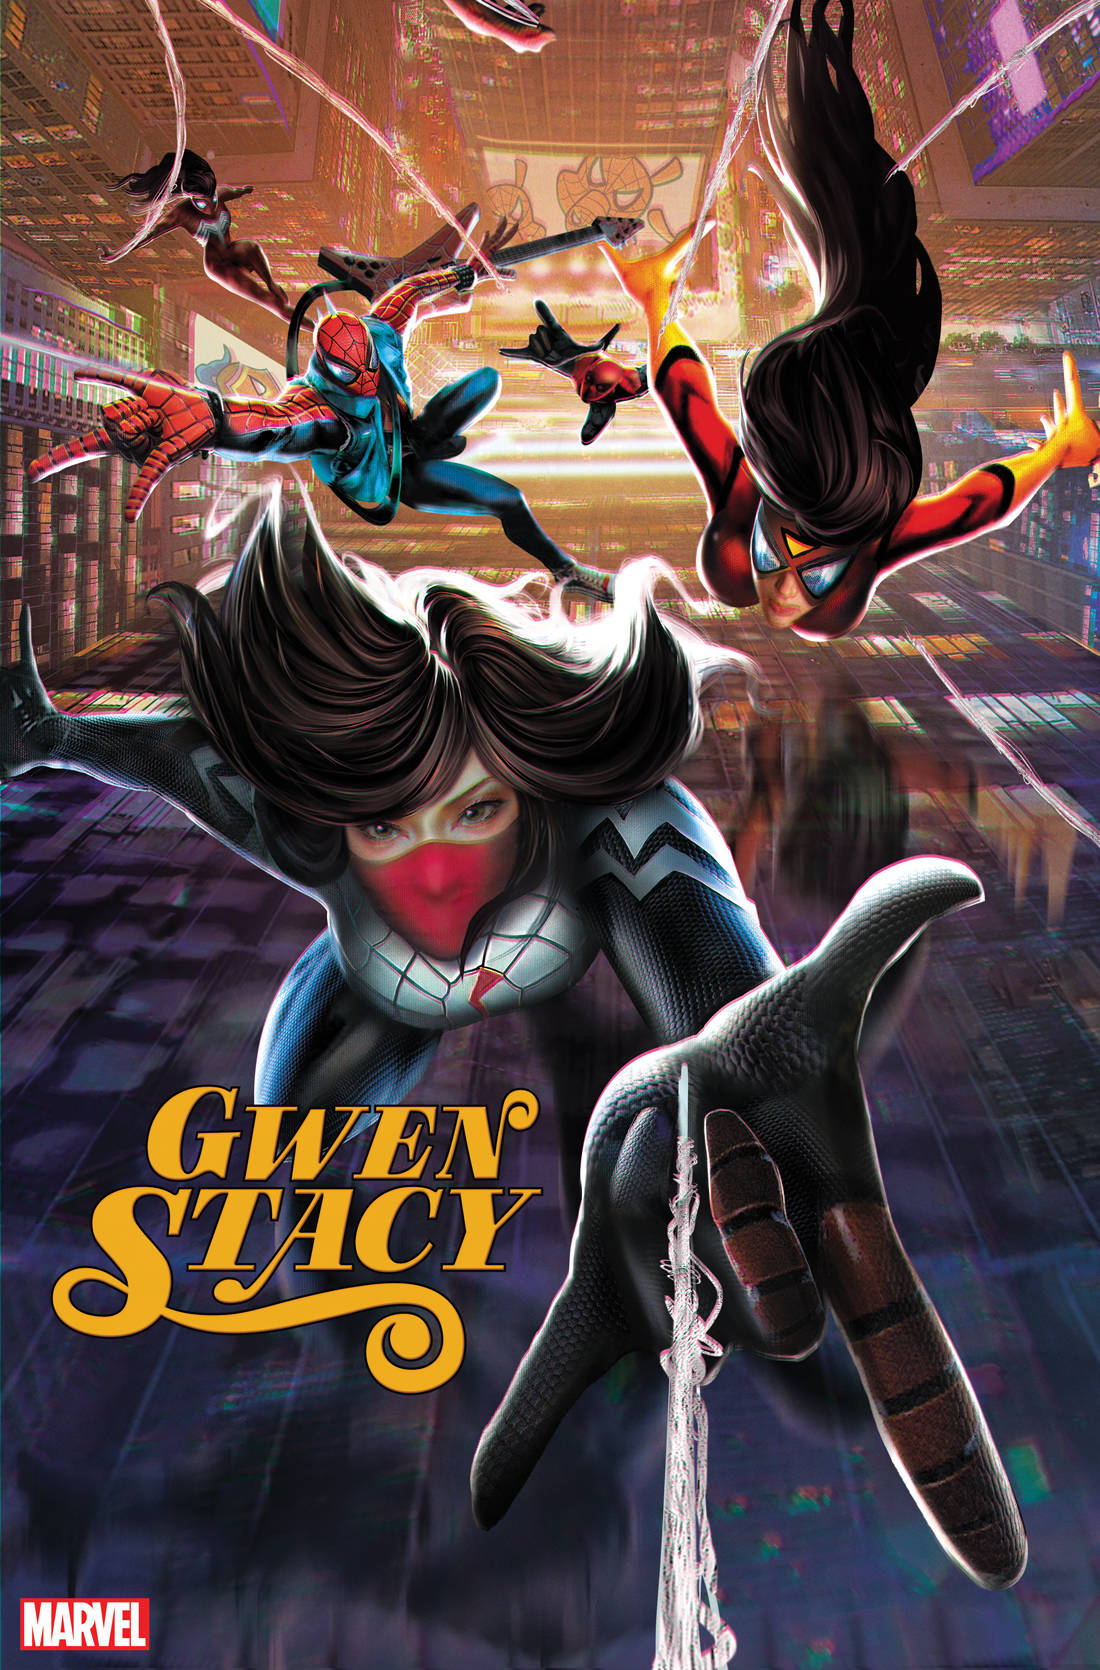 GWEN STACY #1 JIE YUAN CONNECTING CHINESE NEW YEAR VARIANT 2020